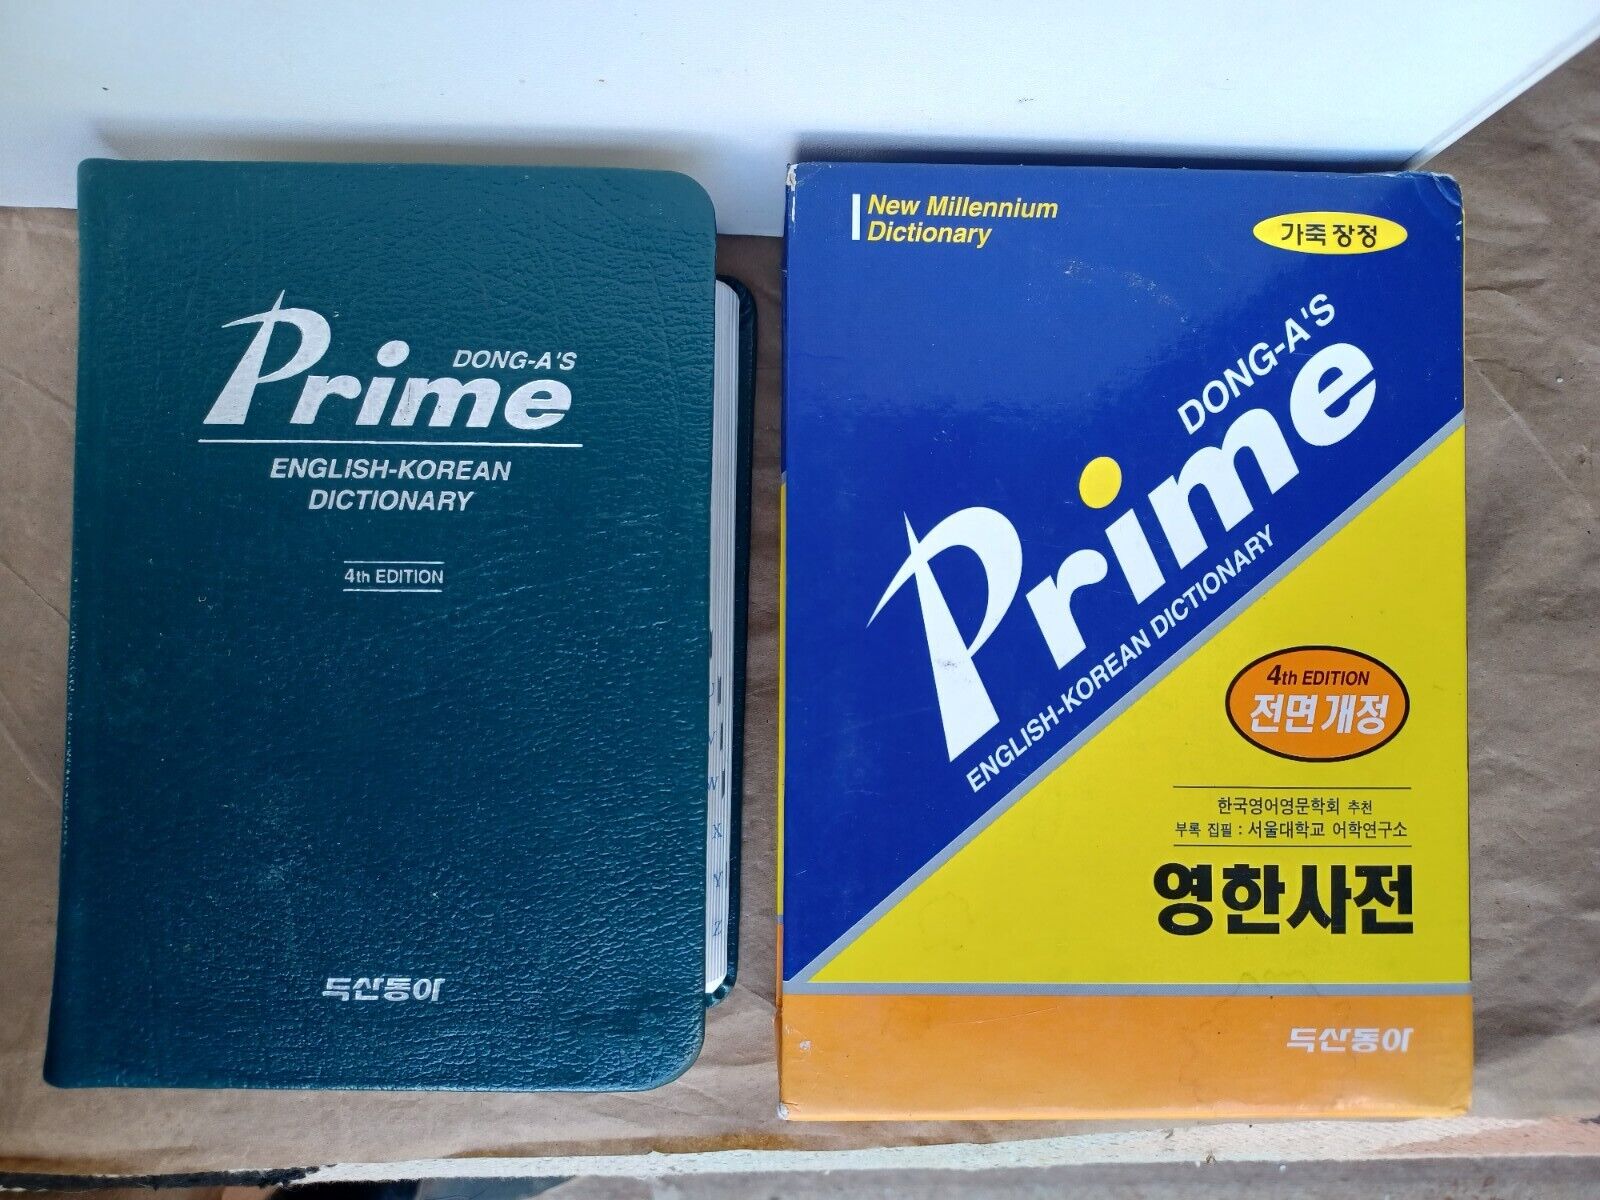 Dong-A\'s Prime English-Korean Dictionary 4th Edition